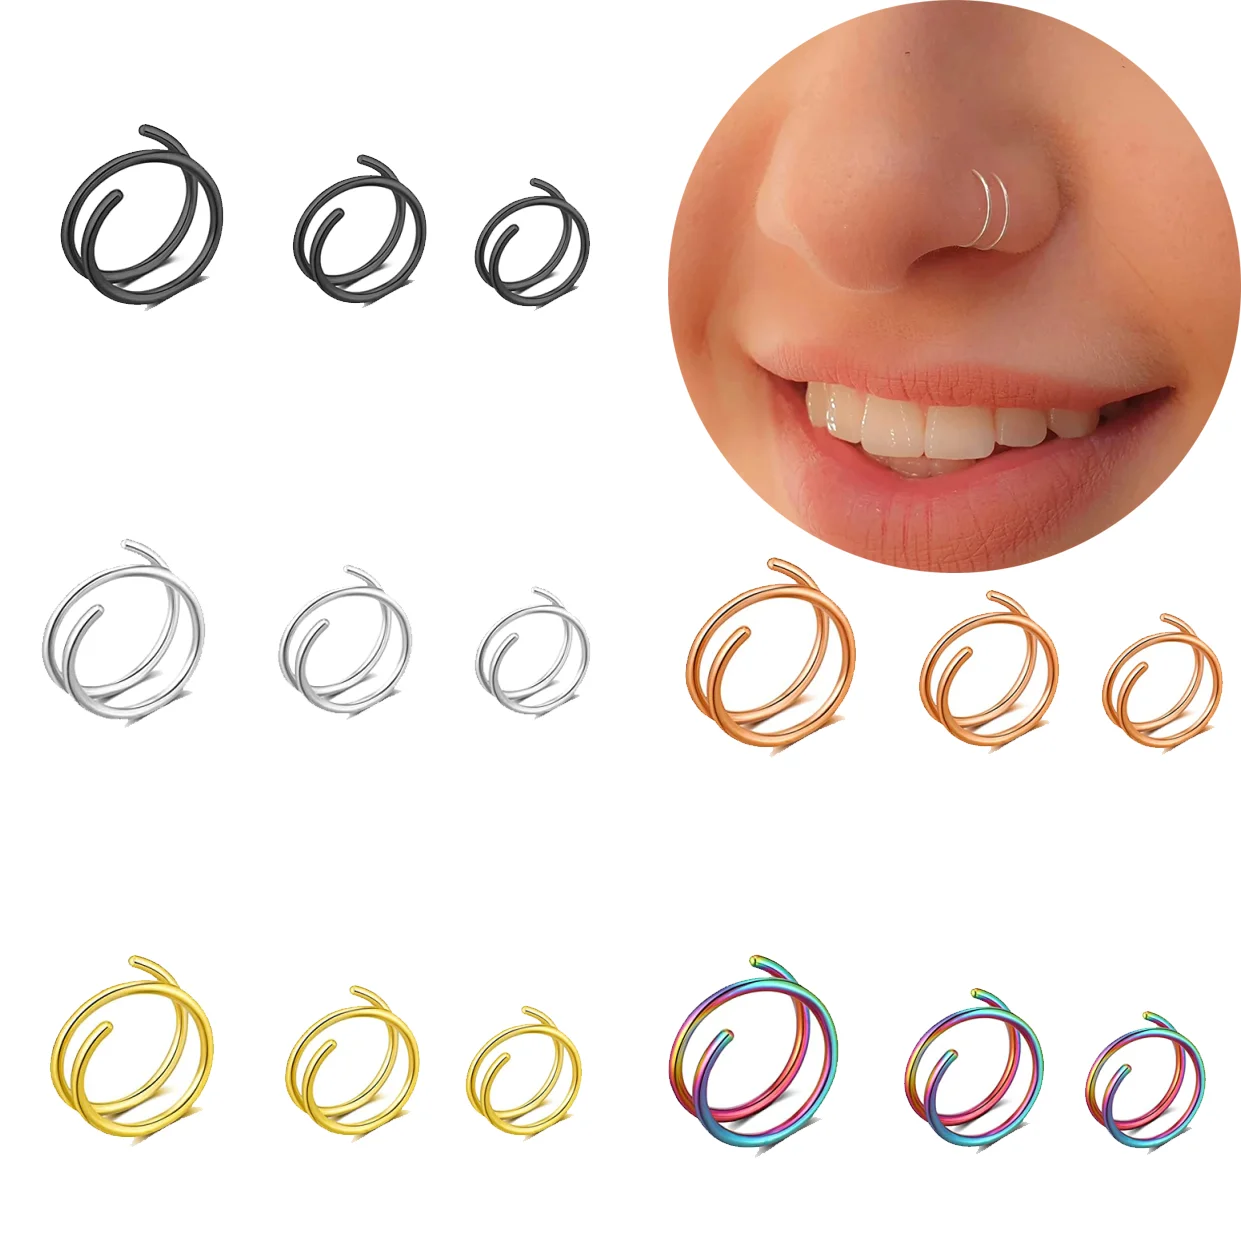 

3Pcs/set Double Hoop Nose Ring for Single Piercing Spiral Nose Ring Double Nose Hoops for Women 8mm 20G Nostril Piercing Jewelry